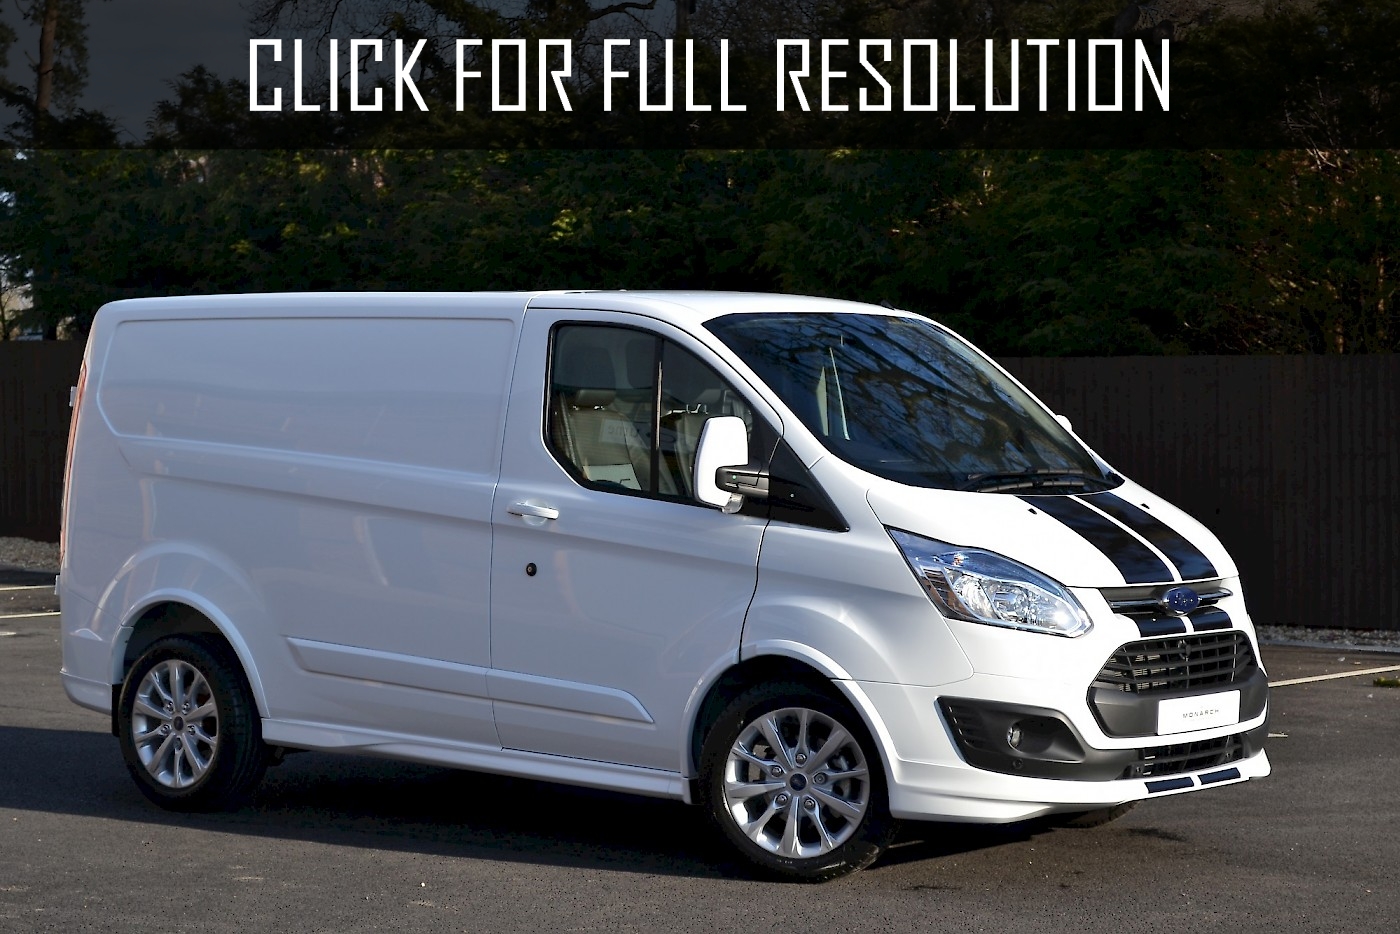 2016 Ford Transit Custom best image gallery 9/15 share